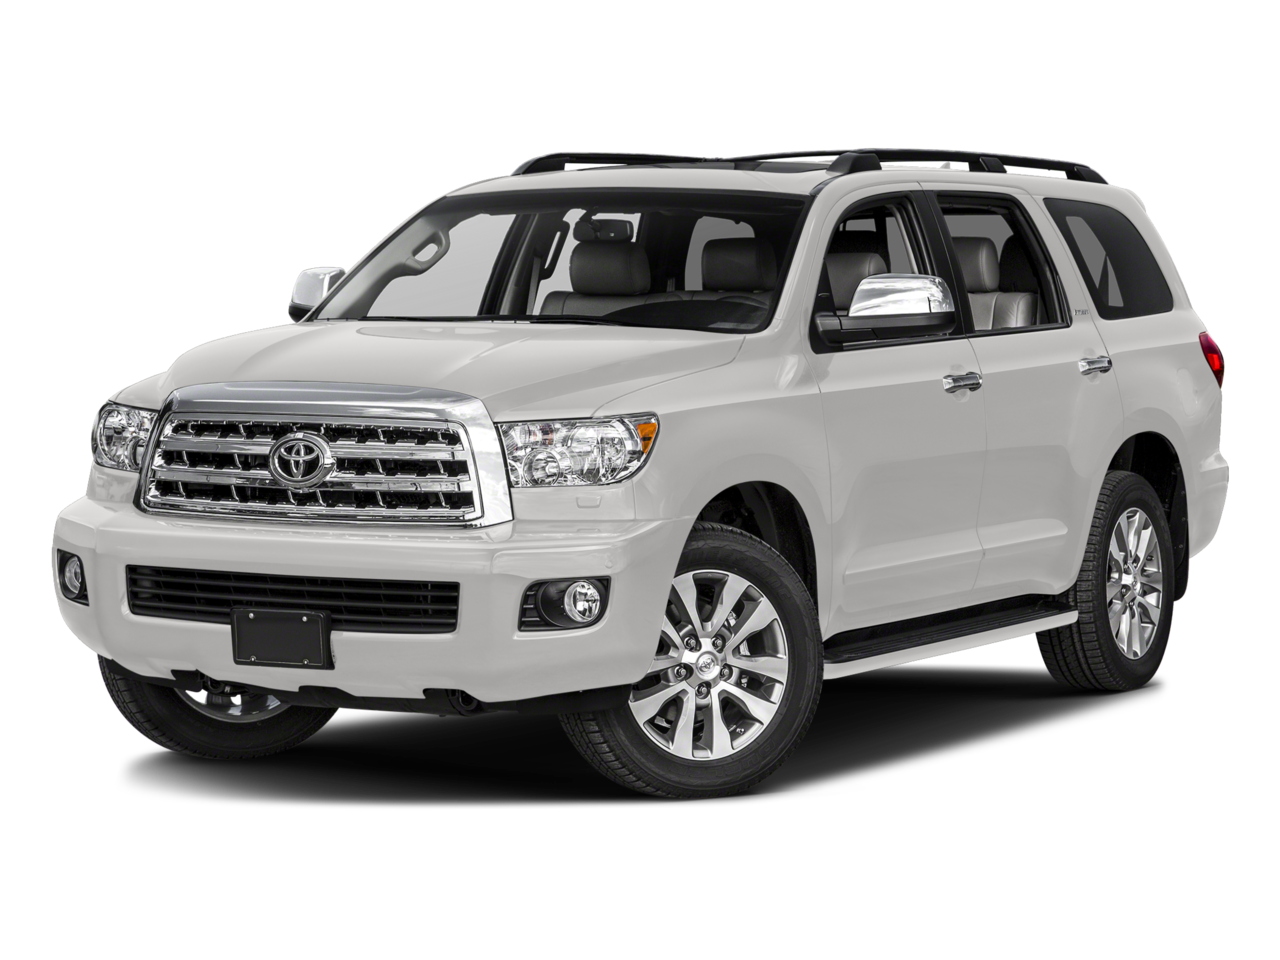 2017 Toyota Sequoia Repair: Service and Maintenance Cost